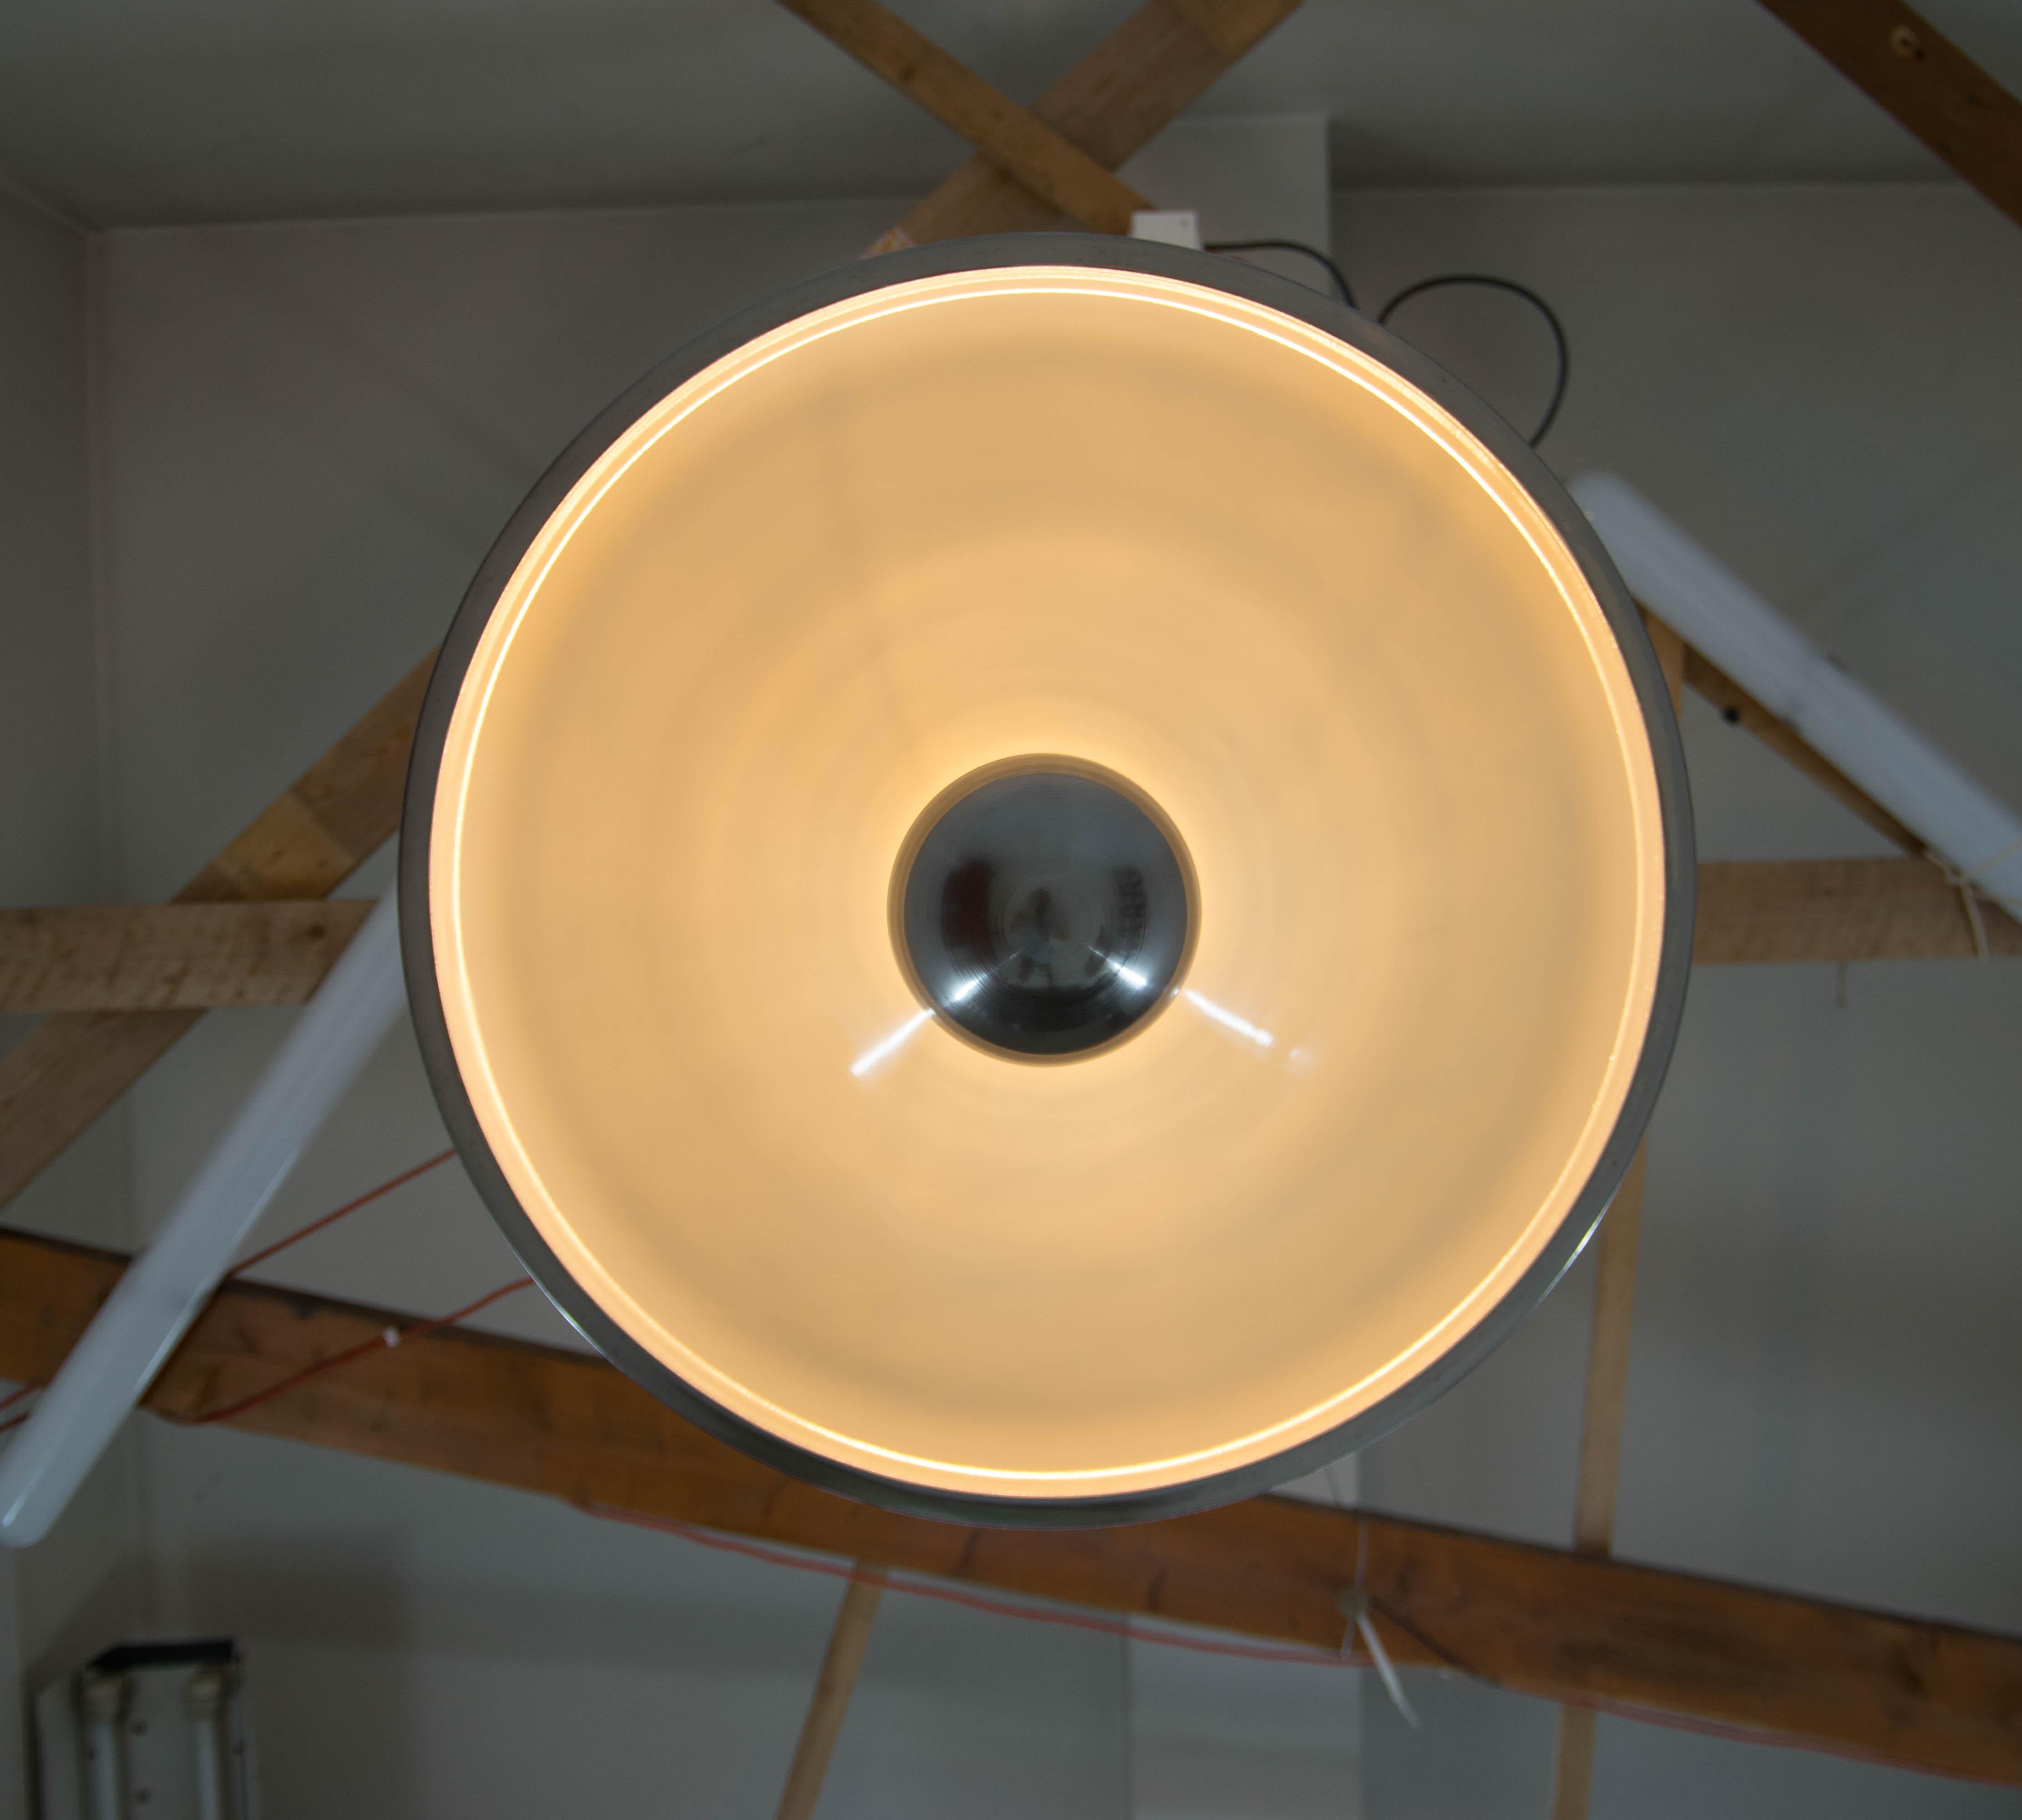 Rare Bauhaus Chandelier with Indirect Light by IAS, 1920s For Sale 4